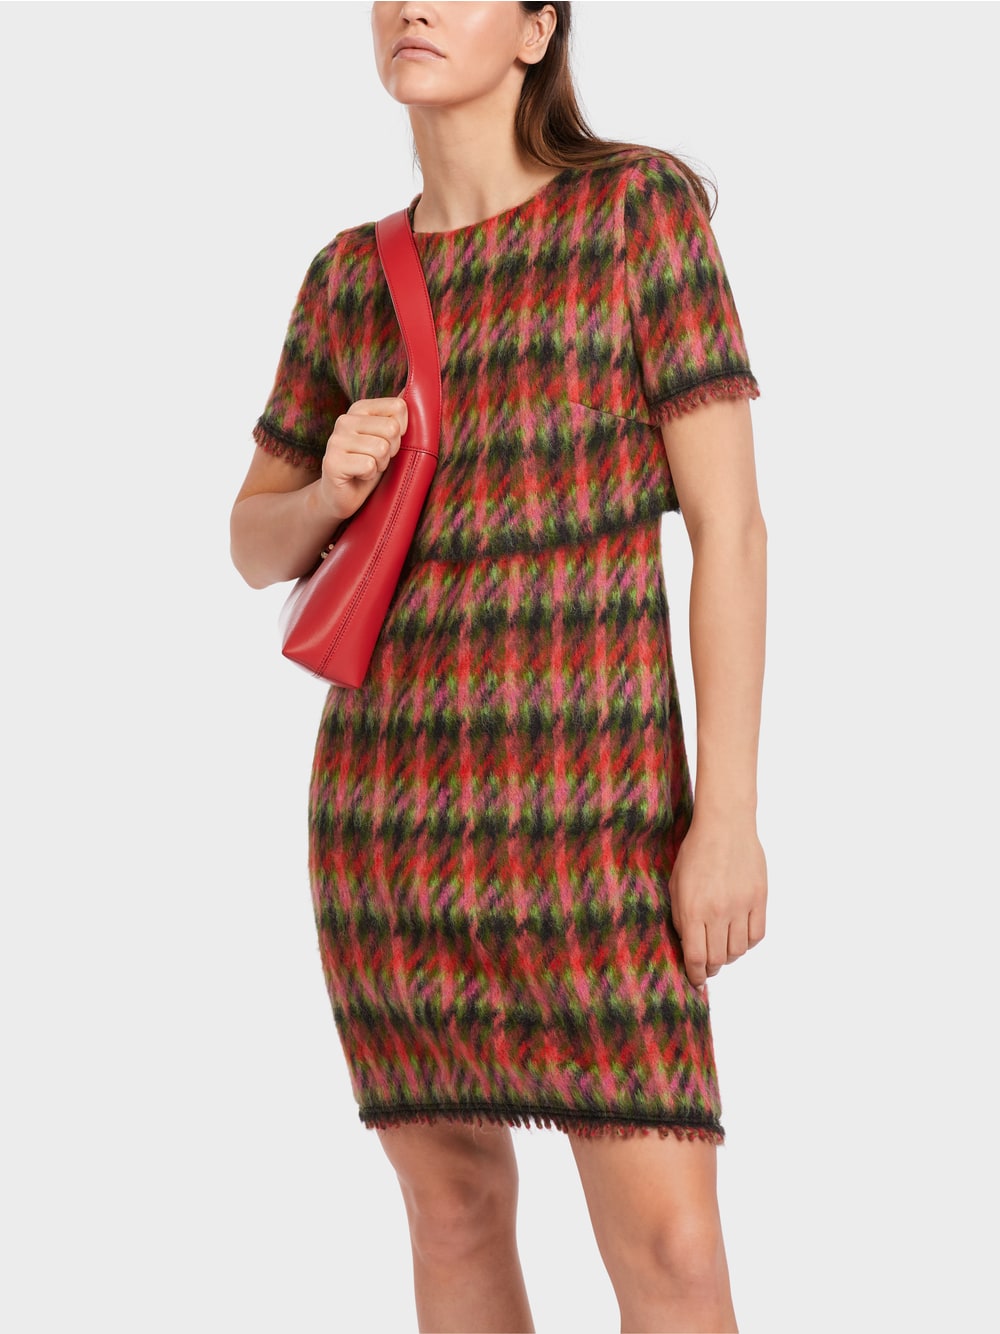 Marc Cain Chequered dress knitted in Germany